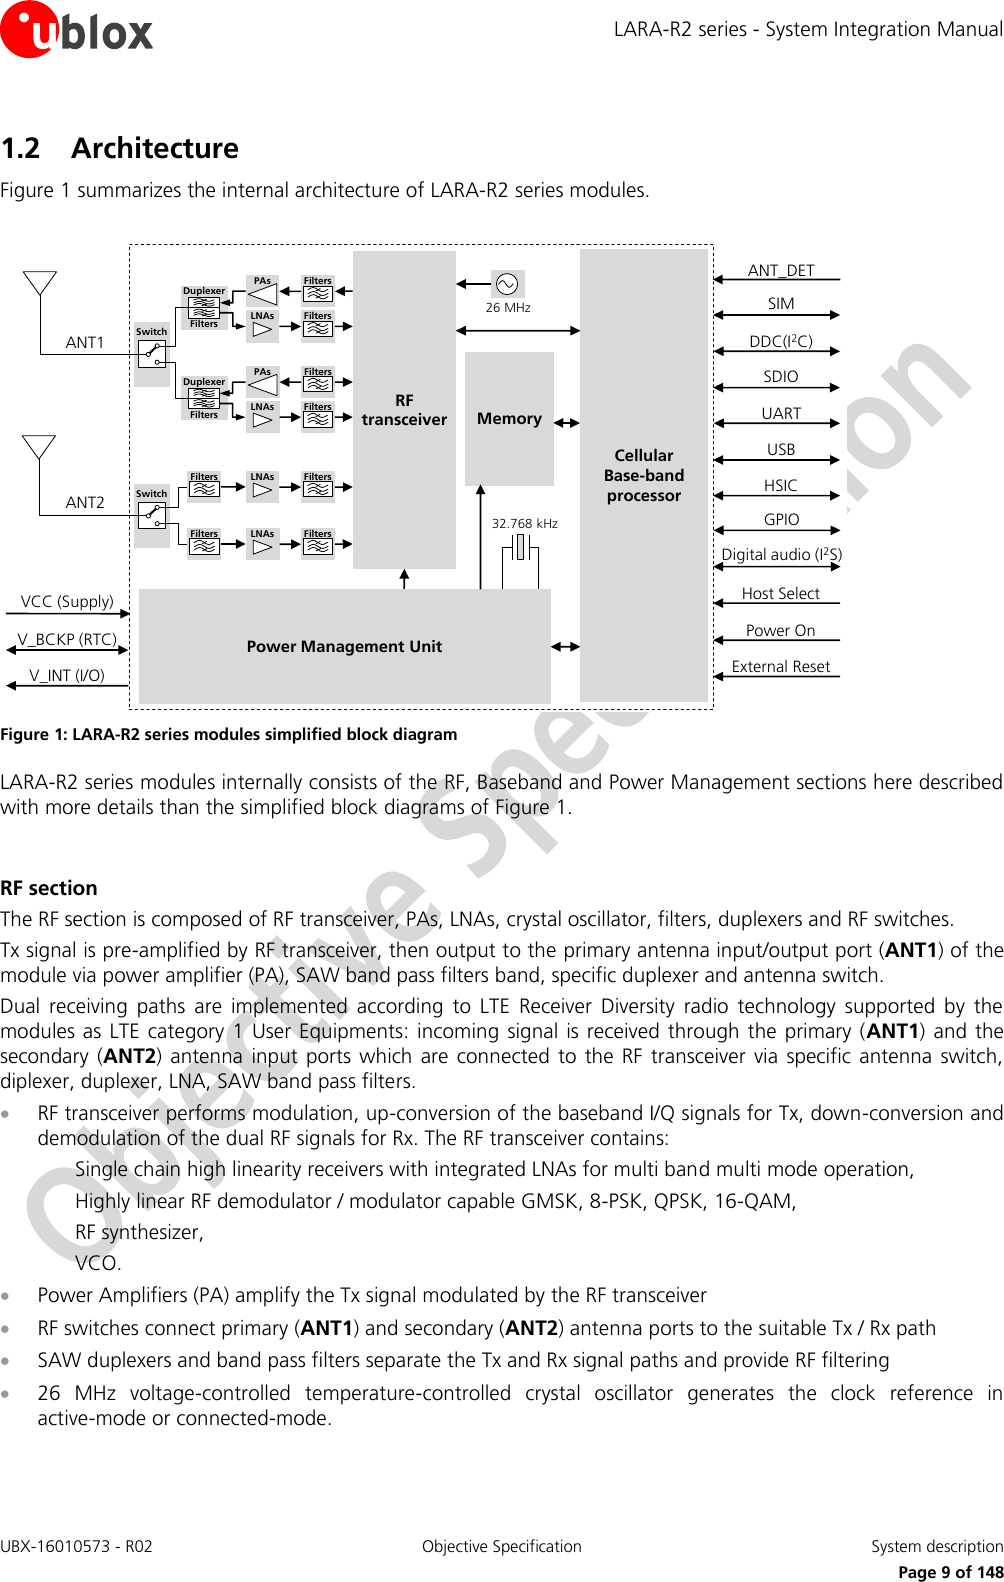 LARA-R2 series - System Integration Manual UBX-16010573 - R02  Objective Specification  System description     Page 9 of 148 1.2 Architecture Figure 1 summarizes the internal architecture of LARA-R2 series modules.  CellularBase-bandprocessorMemoryPower Management Unit26 MHz32.768 kHzANT1RF transceiverANT2V_INT (I/O)V_BCKP (RTC)VCC (Supply)SIMUSBHSICPower OnExternal ResetPAsLNAs FiltersFiltersDuplexerFiltersPAsLNAs FiltersFiltersDuplexerFiltersLNAs FiltersFiltersLNAs FiltersFiltersSwitchSwitchDDC(I2C)SDIOUARTANT_DETHost SelectGPIODigital audio (I2S) Figure 1: LARA-R2 series modules simplified block diagram LARA-R2 series modules internally consists of the RF, Baseband and Power Management sections here described with more details than the simplified block diagrams of Figure 1.  RF section The RF section is composed of RF transceiver, PAs, LNAs, crystal oscillator, filters, duplexers and RF switches. Tx signal is pre-amplified by RF transceiver, then output to the primary antenna input/output port (ANT1) of the module via power amplifier (PA), SAW band pass filters band, specific duplexer and antenna switch. Dual  receiving  paths  are  implemented  according  to  LTE  Receiver  Diversity  radio  technology  supported  by  the modules as  LTE category  1 User Equipments: incoming signal  is  received through  the primary  (ANT1) and the secondary  (ANT2)  antenna  input  ports which are connected  to  the RF  transceiver  via  specific  antenna  switch, diplexer, duplexer, LNA, SAW band pass filters.   RF transceiver performs modulation, up-conversion of the baseband I/Q signals for Tx, down-conversion and demodulation of the dual RF signals for Rx. The RF transceiver contains: Single chain high linearity receivers with integrated LNAs for multi band multi mode operation, Highly linear RF demodulator / modulator capable GMSK, 8-PSK, QPSK, 16-QAM,  RF synthesizer, VCO.  Power Amplifiers (PA) amplify the Tx signal modulated by the RF transceiver   RF switches connect primary (ANT1) and secondary (ANT2) antenna ports to the suitable Tx / Rx path  SAW duplexers and band pass filters separate the Tx and Rx signal paths and provide RF filtering  26  MHz  voltage-controlled  temperature-controlled  crystal  oscillator  generates  the  clock  reference  in active-mode or connected-mode.  